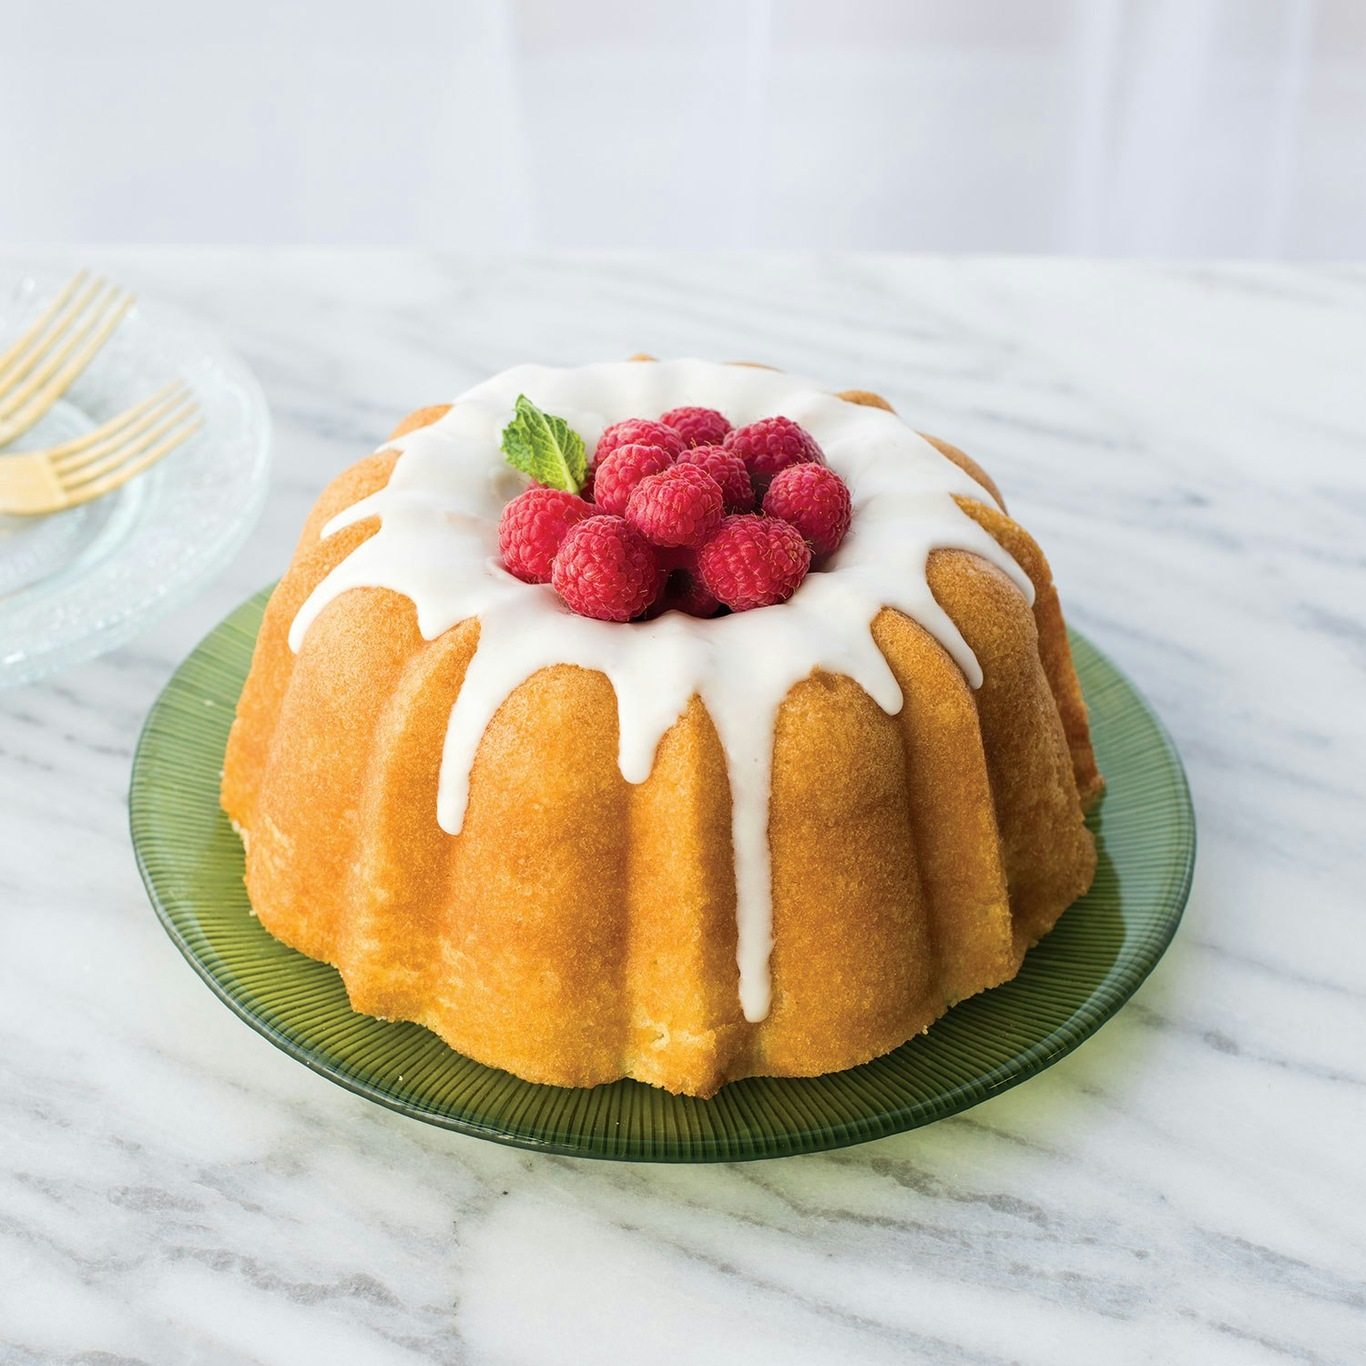 Nordic Ware 75th Anniversary Braided Bundt Pan - Bake from Scratch